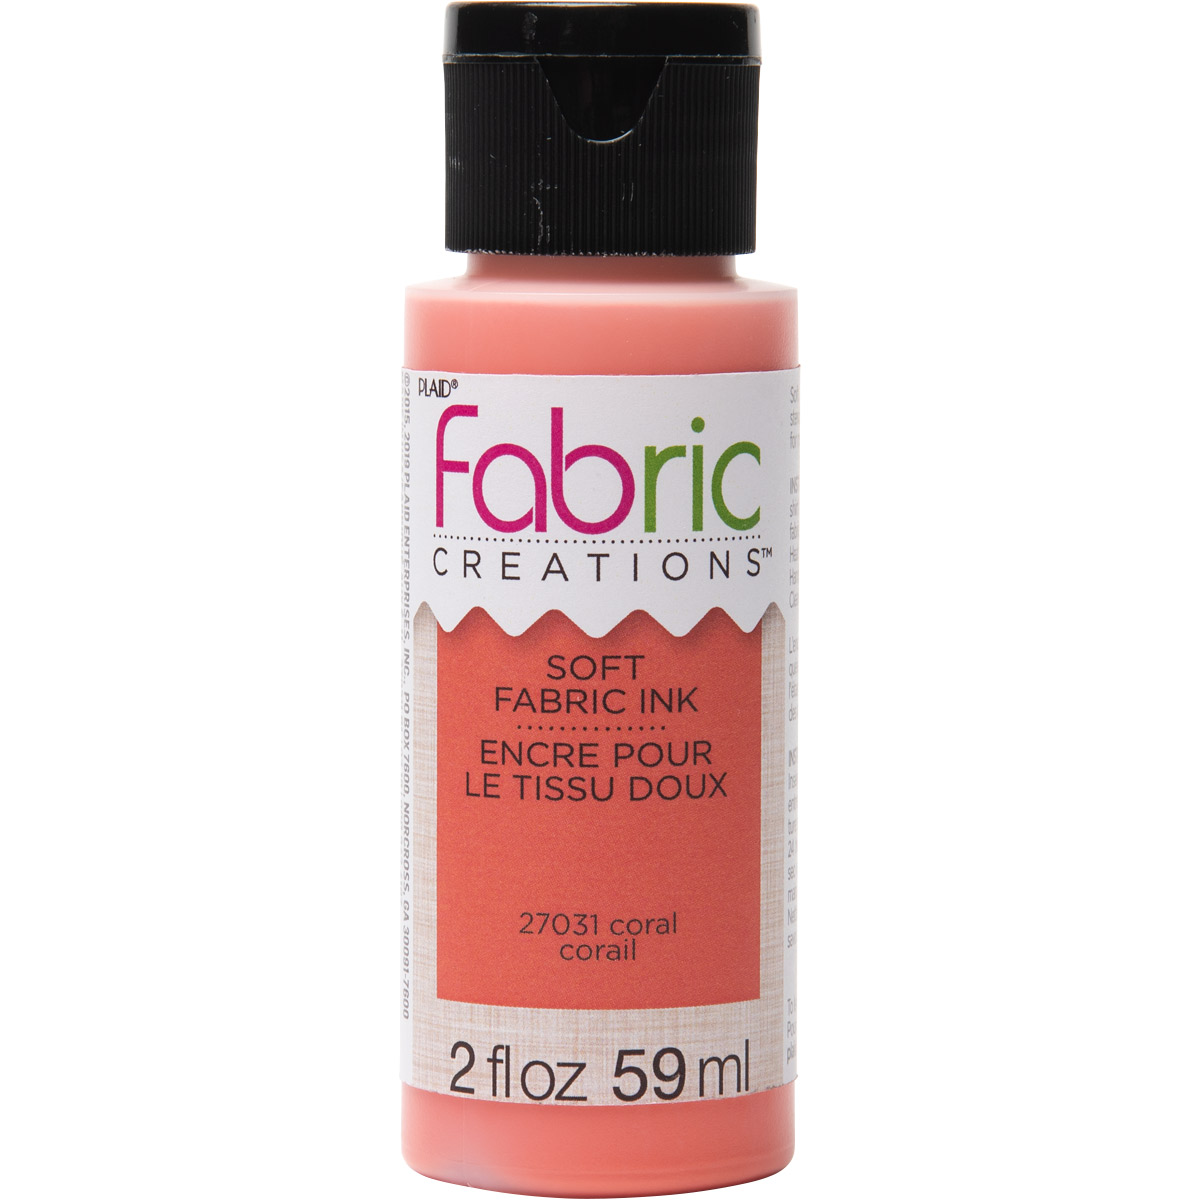 Fabric Creations™ Soft Fabric Inks - Coral, 2 oz. - 27031